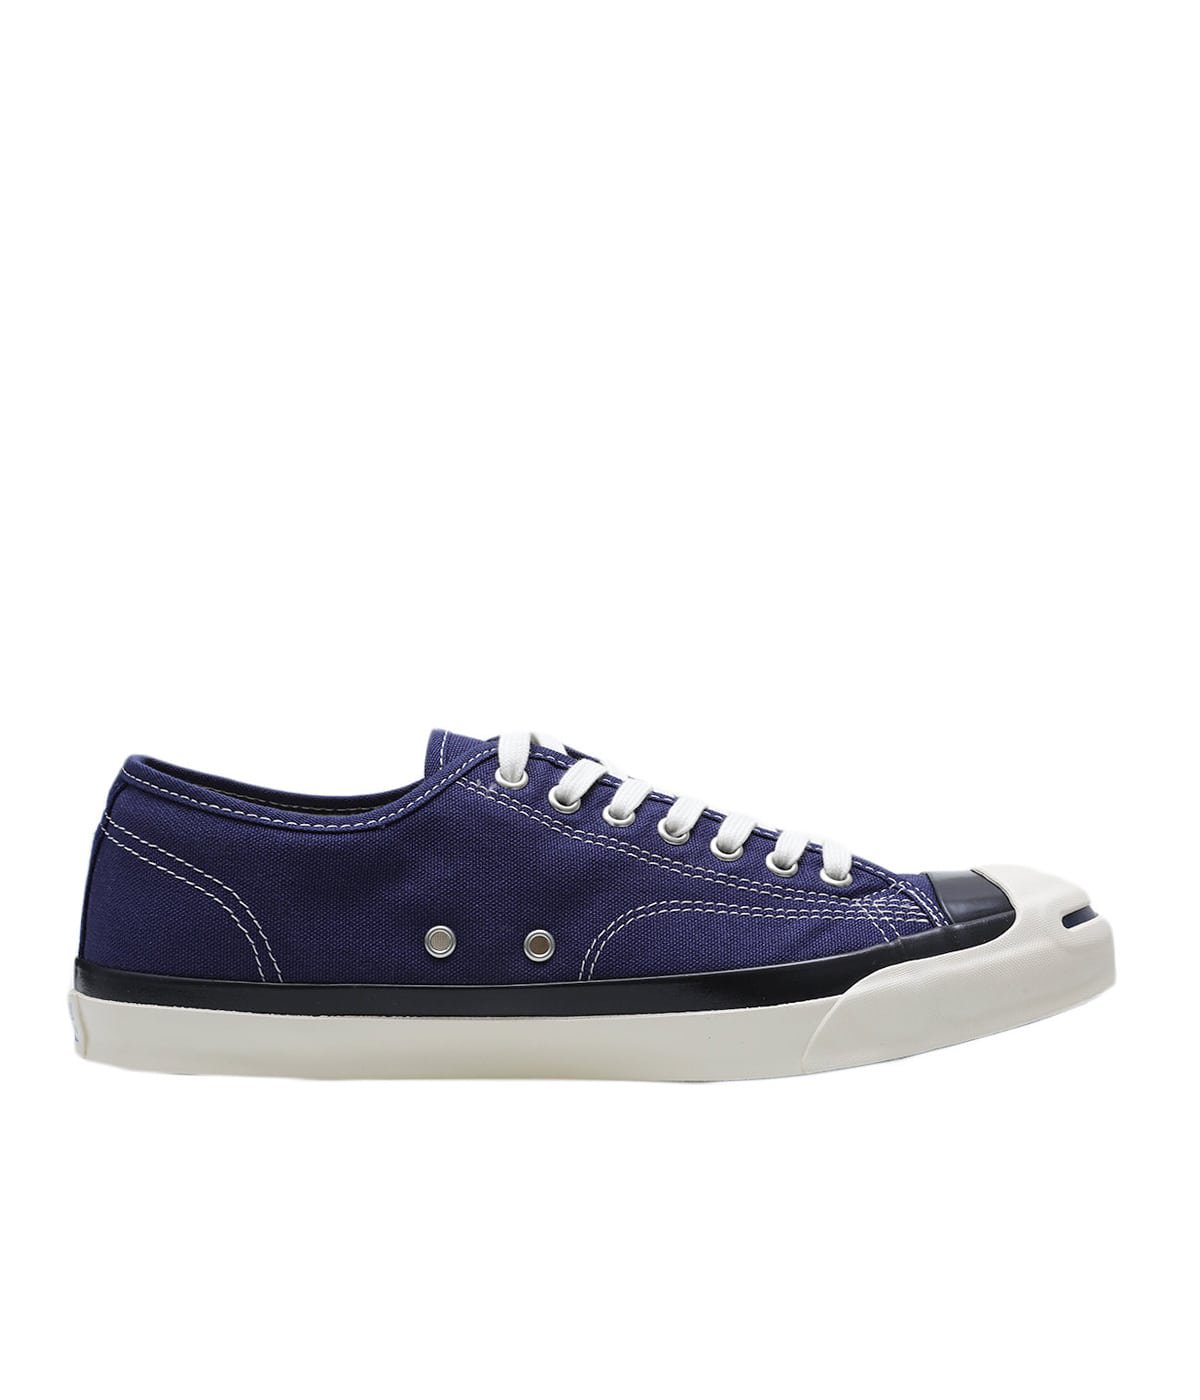 JACK PURCELL US COLORS